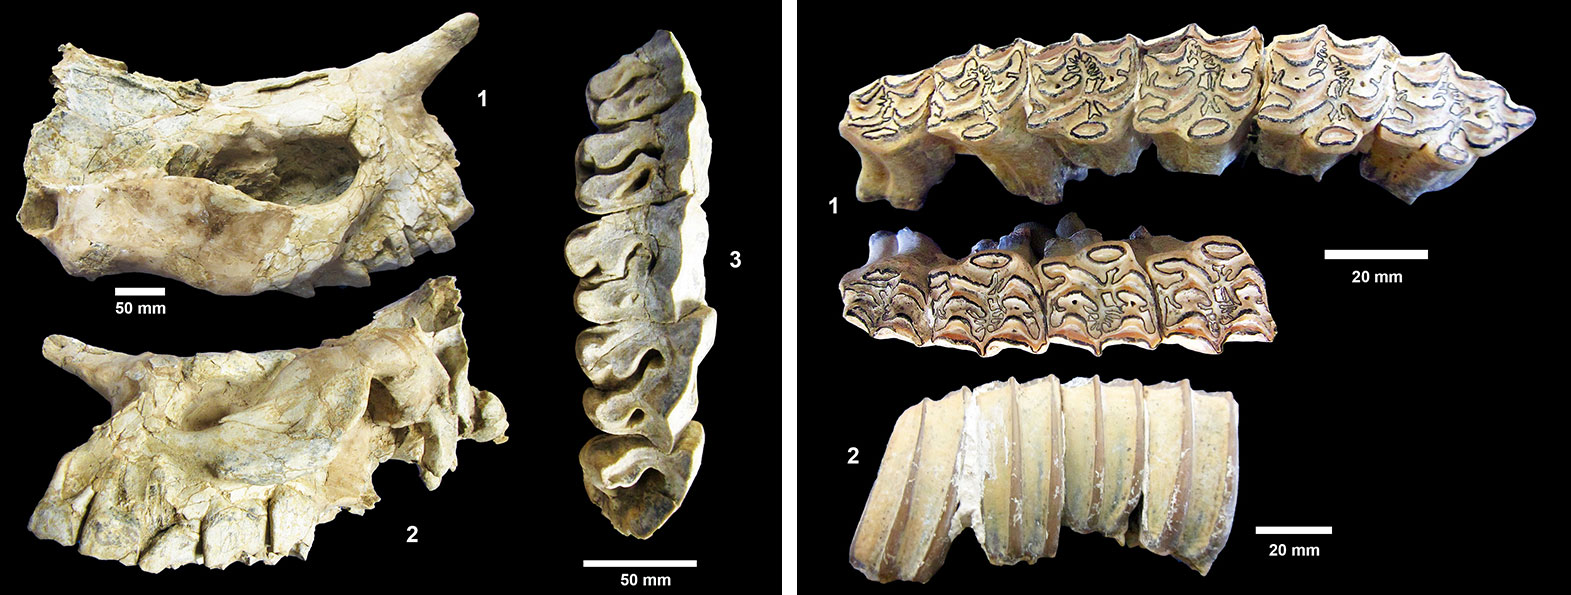 2-panel figure showing photos of herbivorous mammal fossils. Panel 1: Parts of the skull and teeth of an extinct rhino. Panel 2: Teeth of an extinct horse.